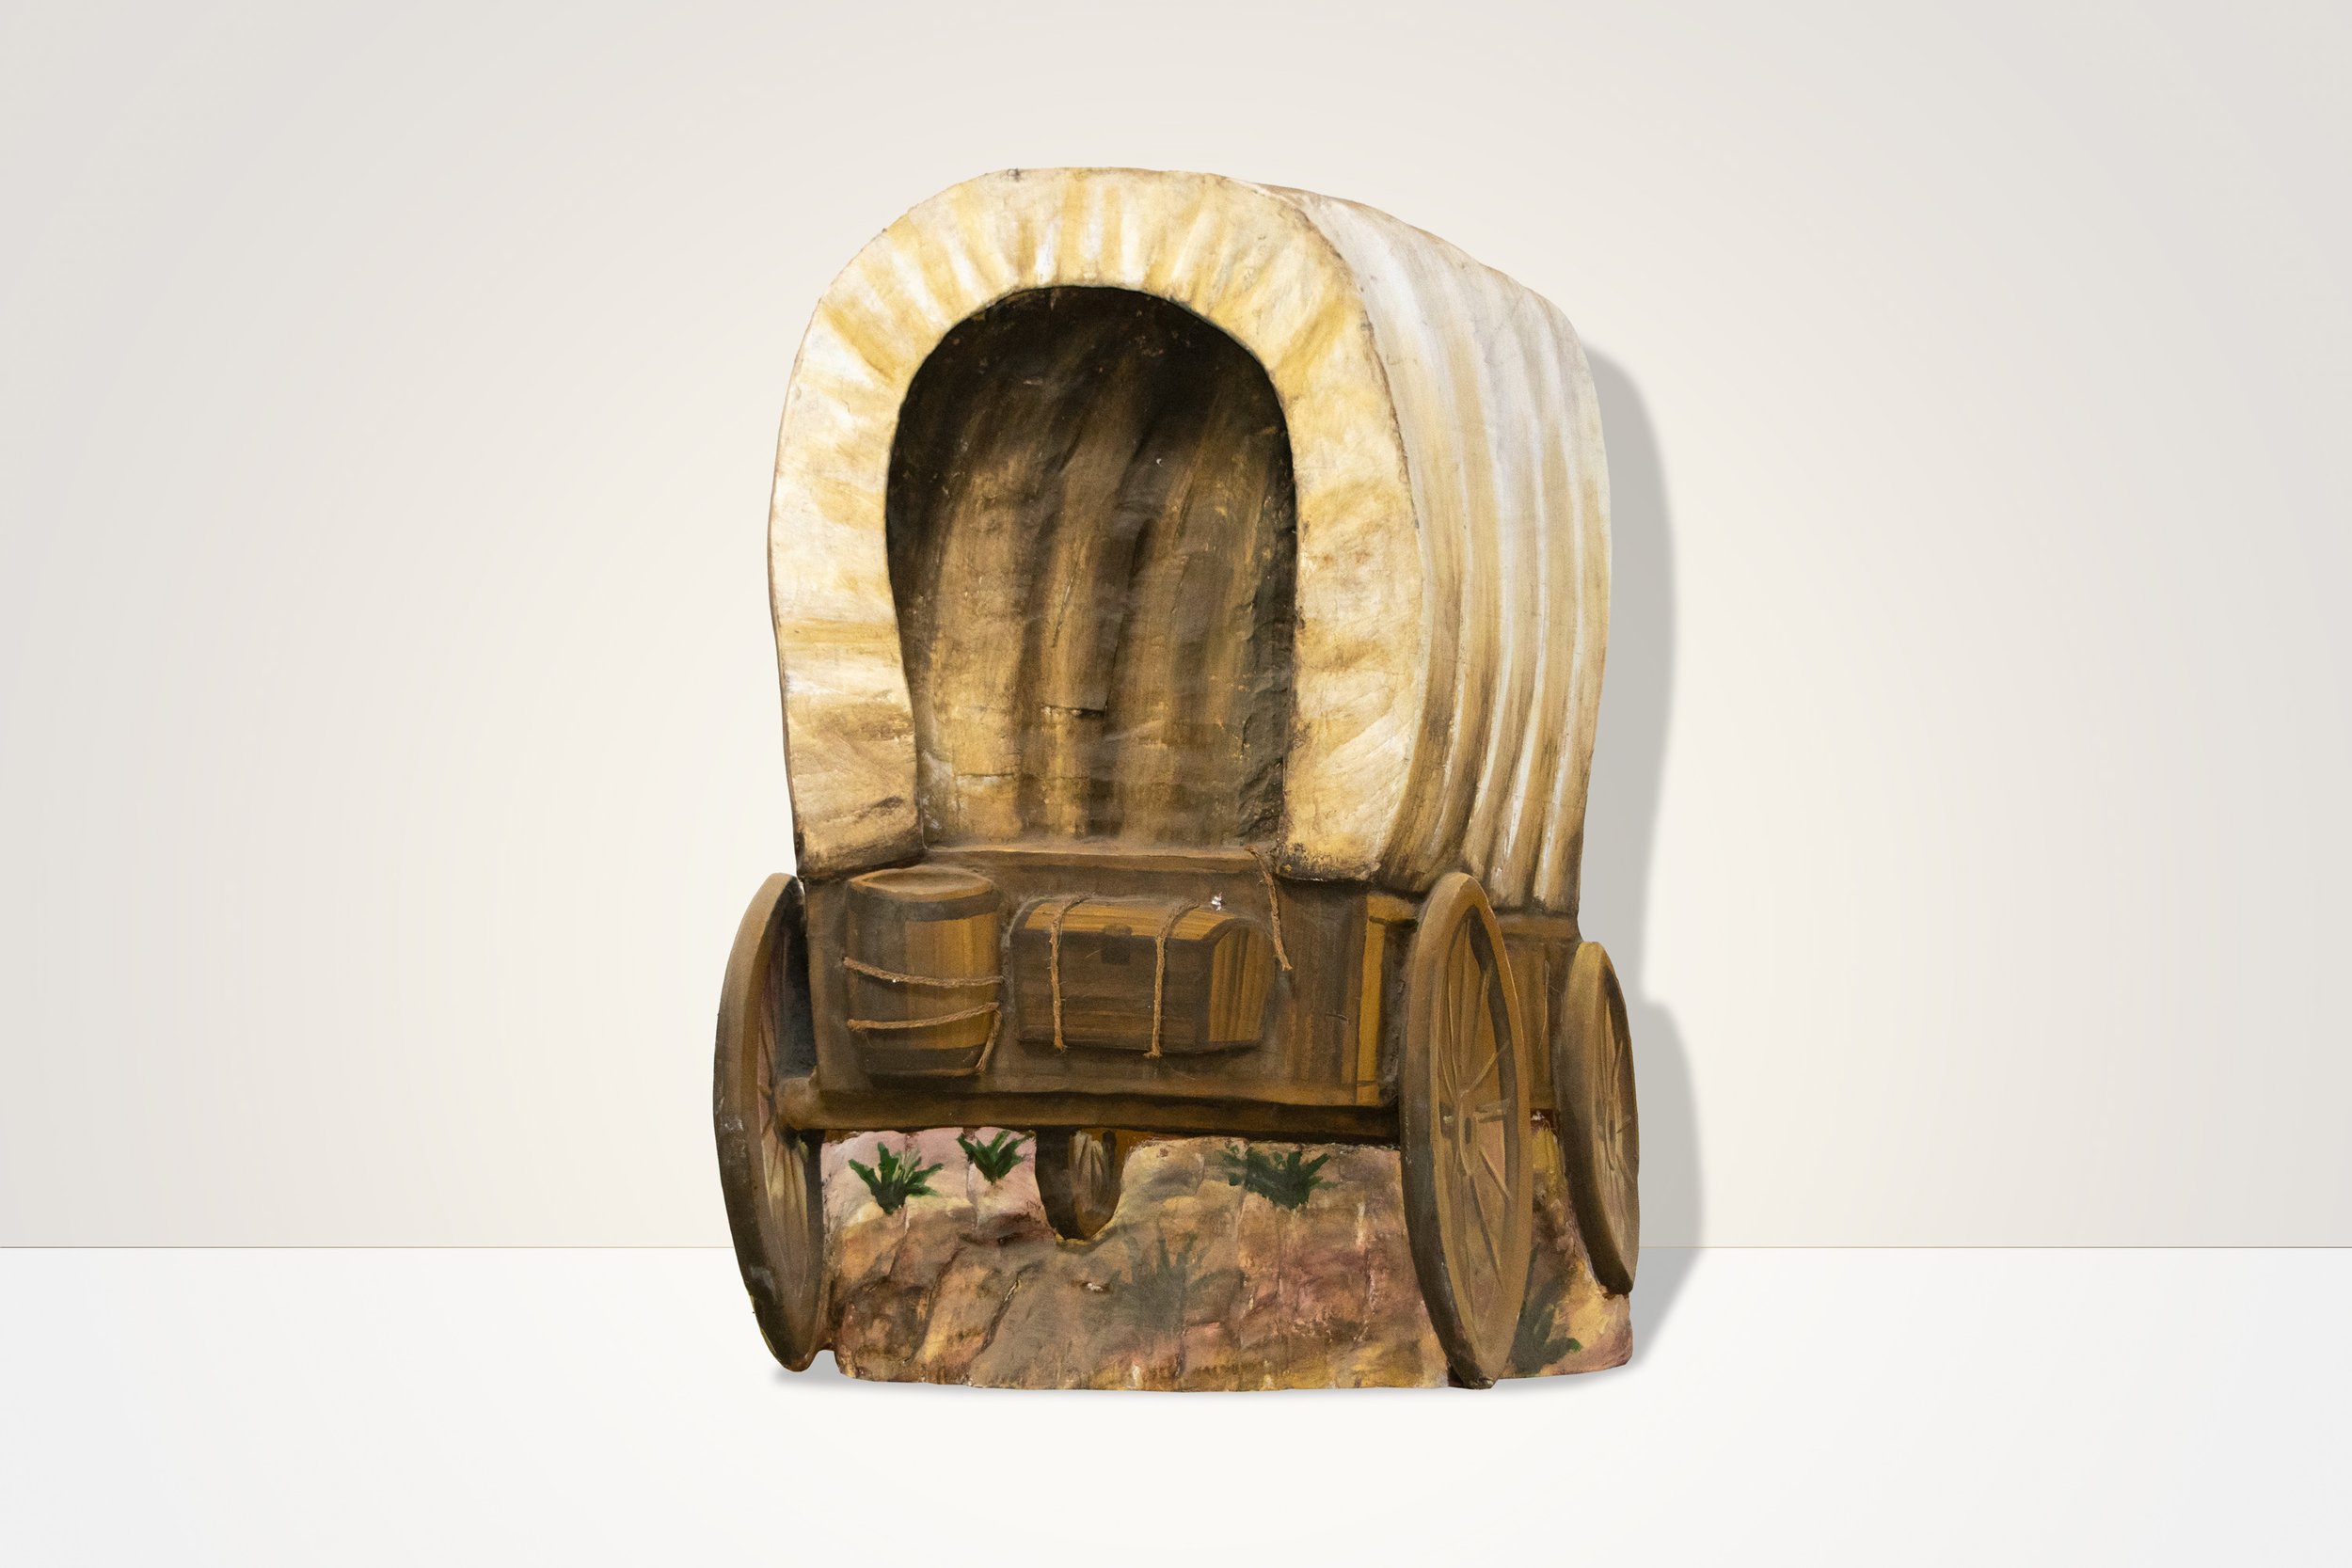 The 3D in Relief Covered Wagon